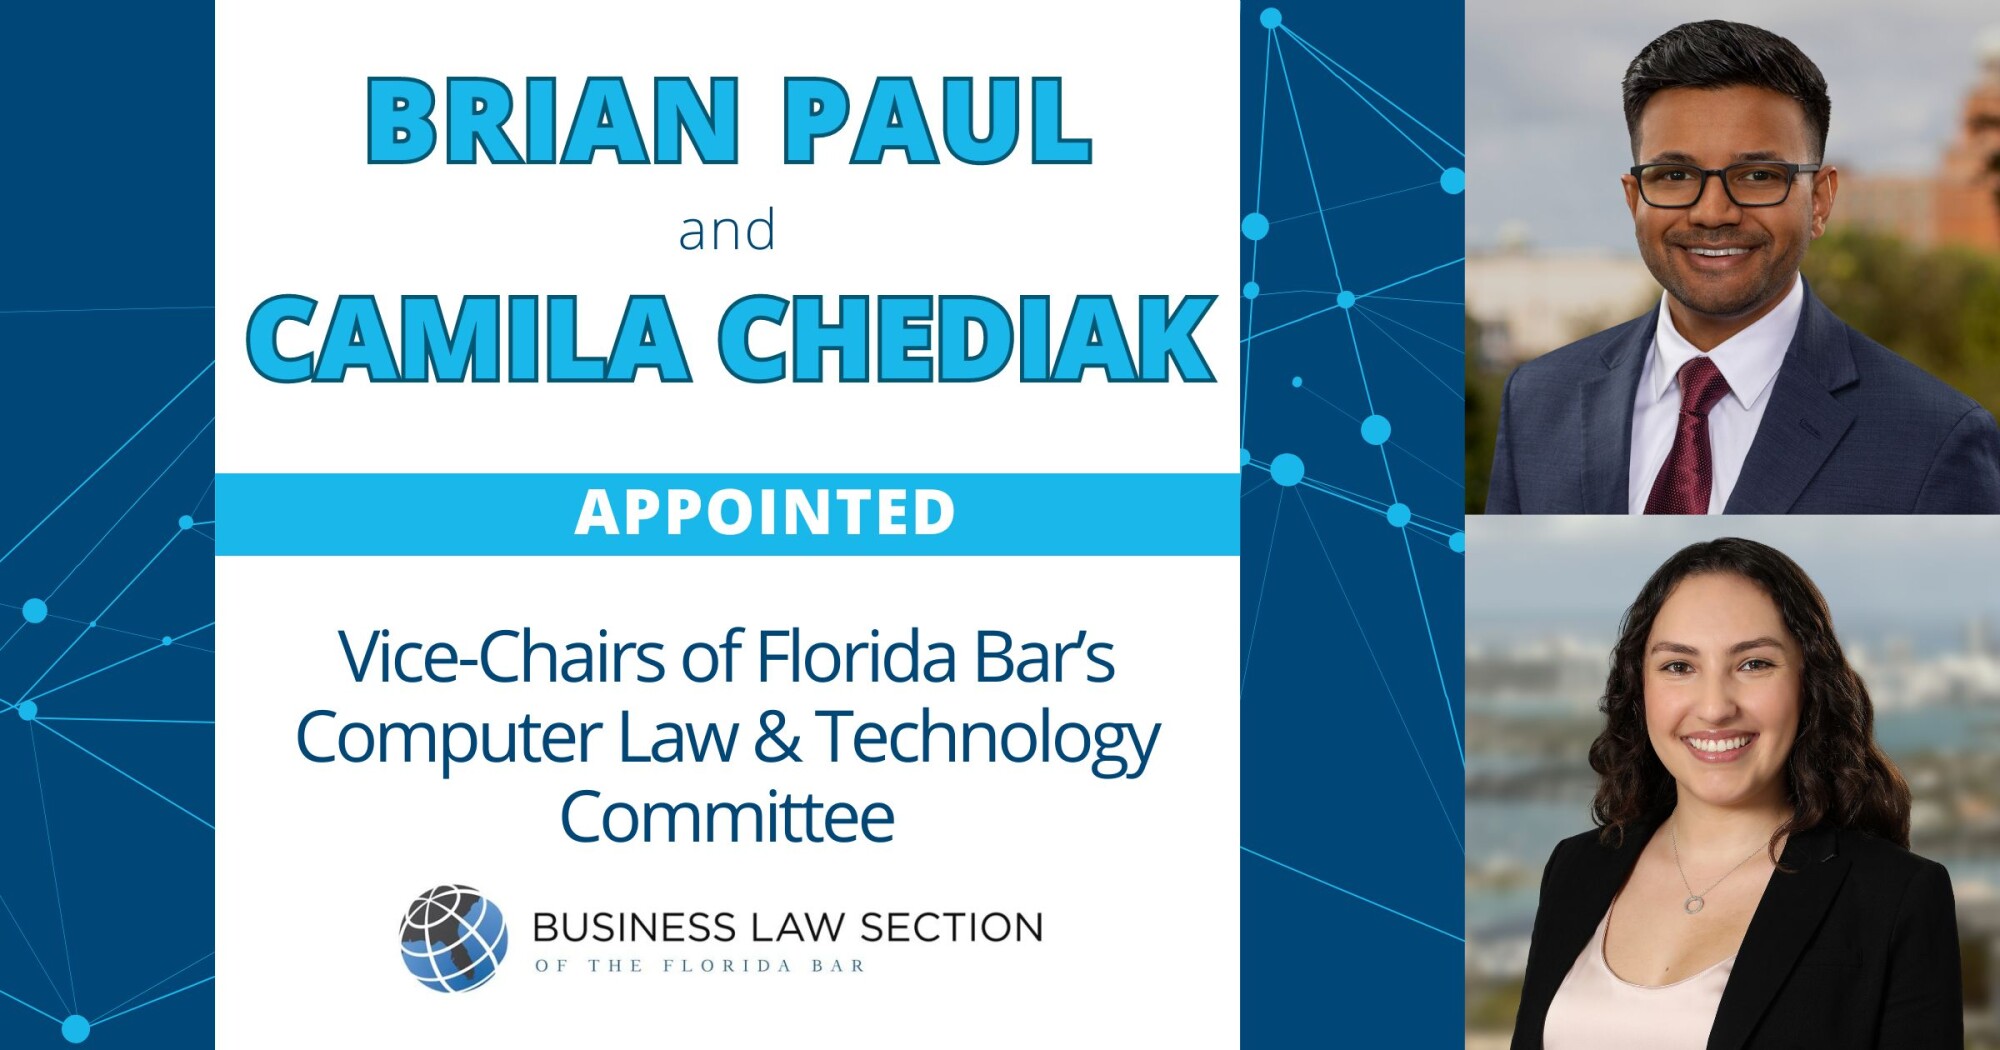 Brian Paul and Camila Chediak Appointed Vice-Chairs of the Business Law Section’s Computer Law & Technology Committee